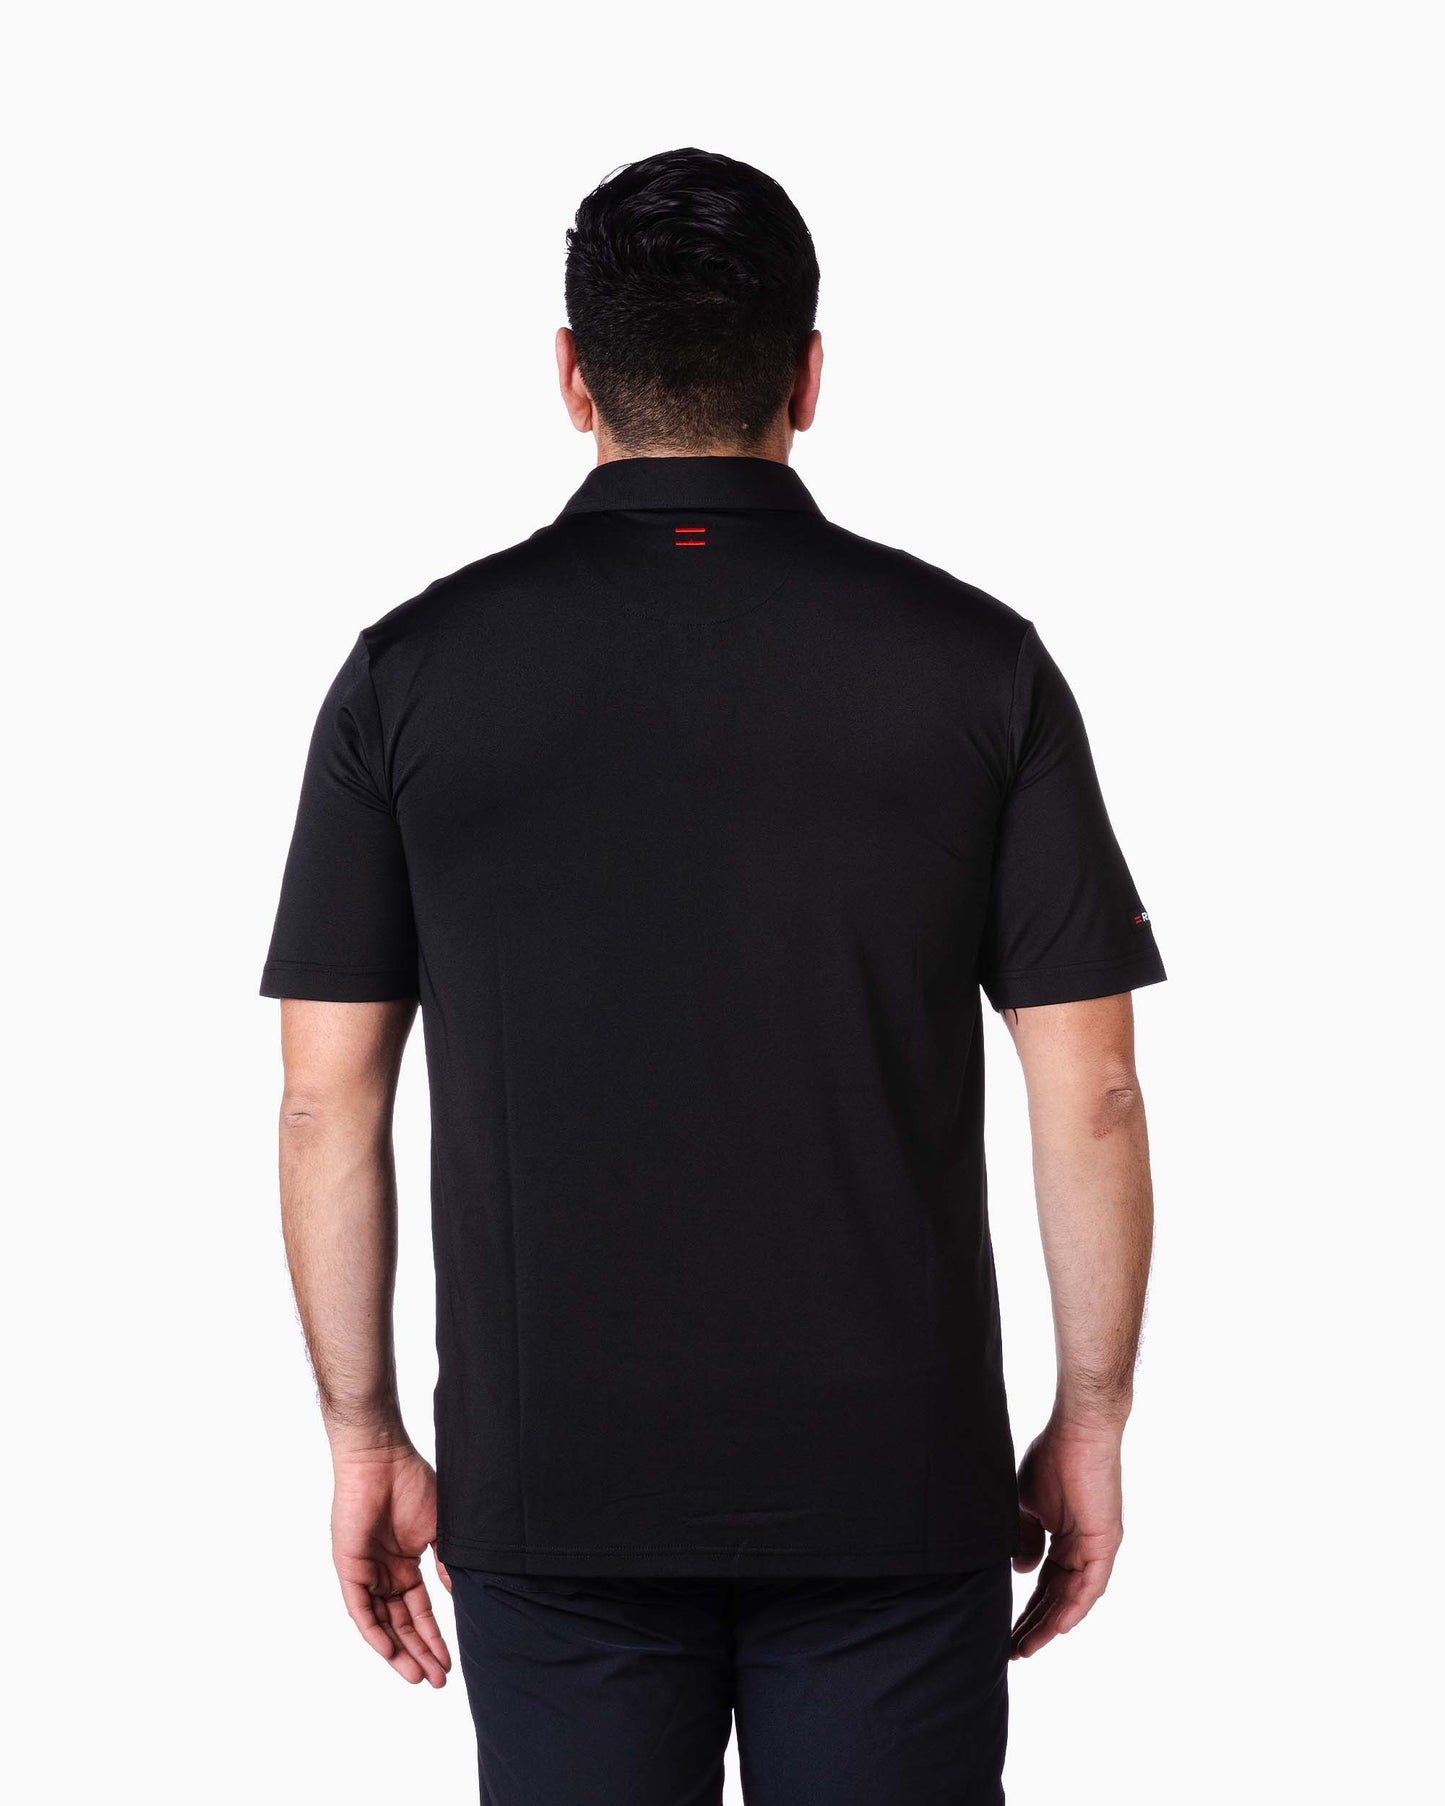 back of man wearing black polo with two red woven stripes on neck